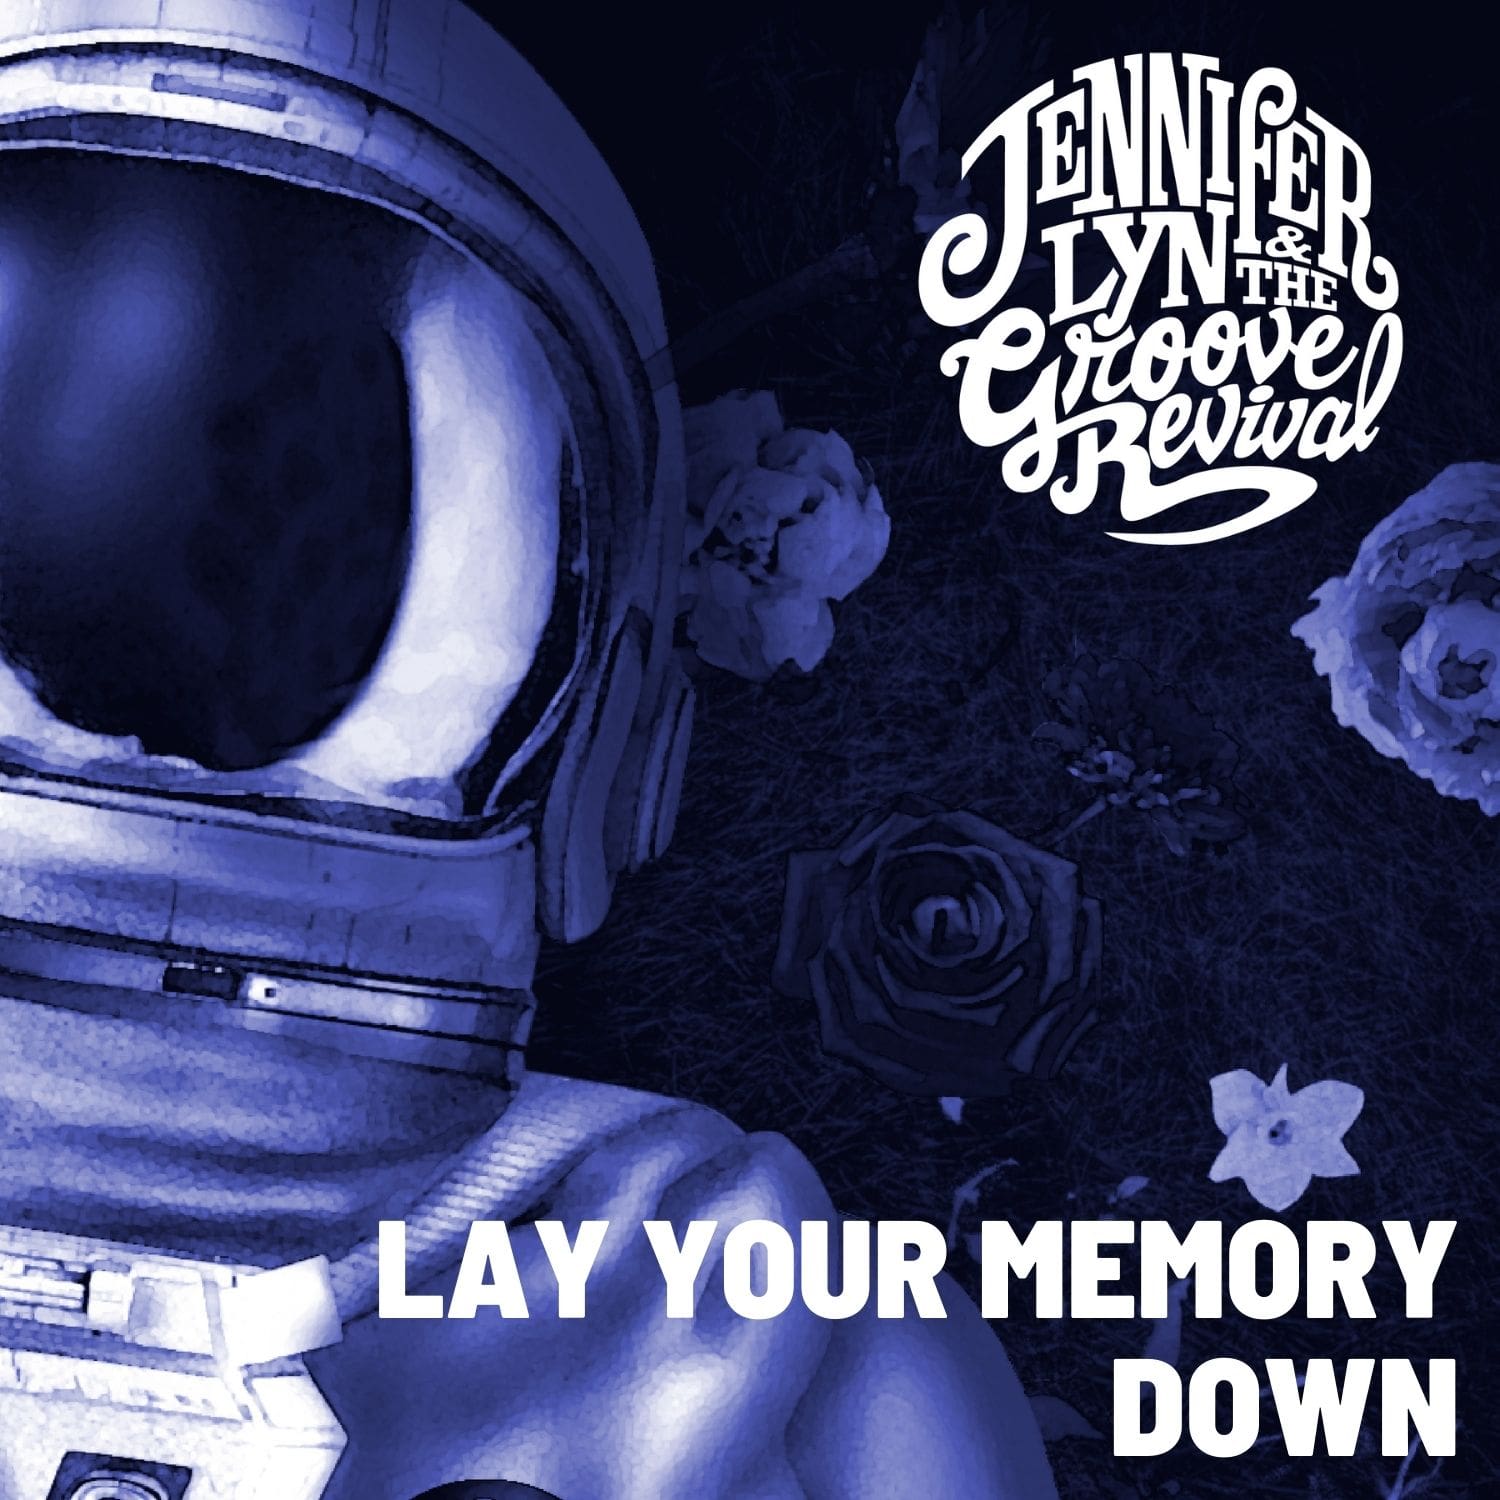 Lay Your Memory Down - A Single by Jennifer Lyn & The Groove Revival